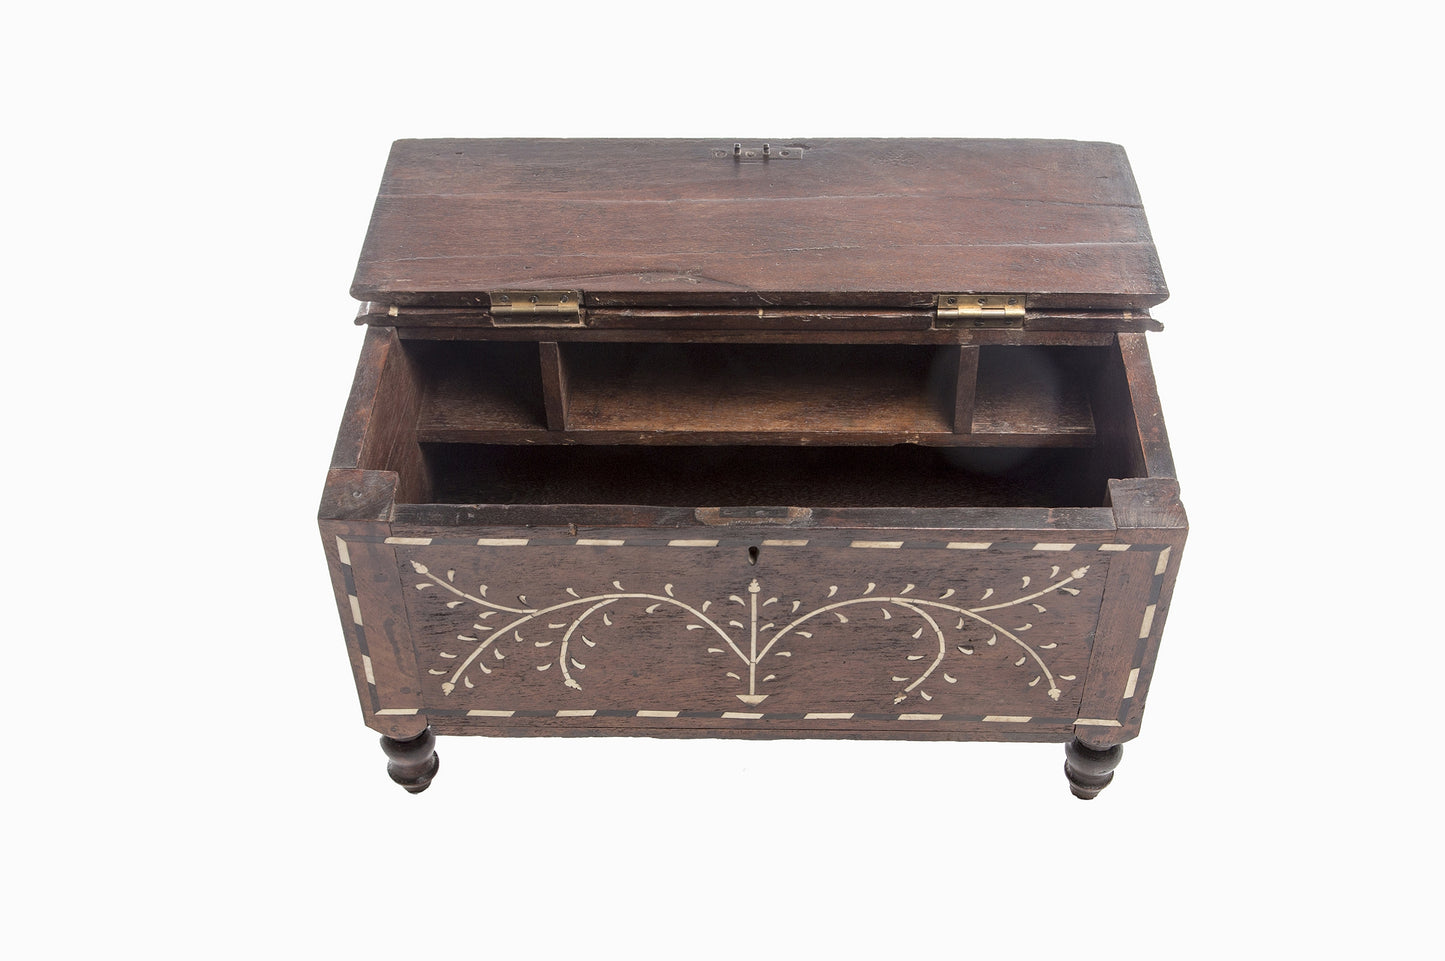 Small wooden chest with inlaid bone work